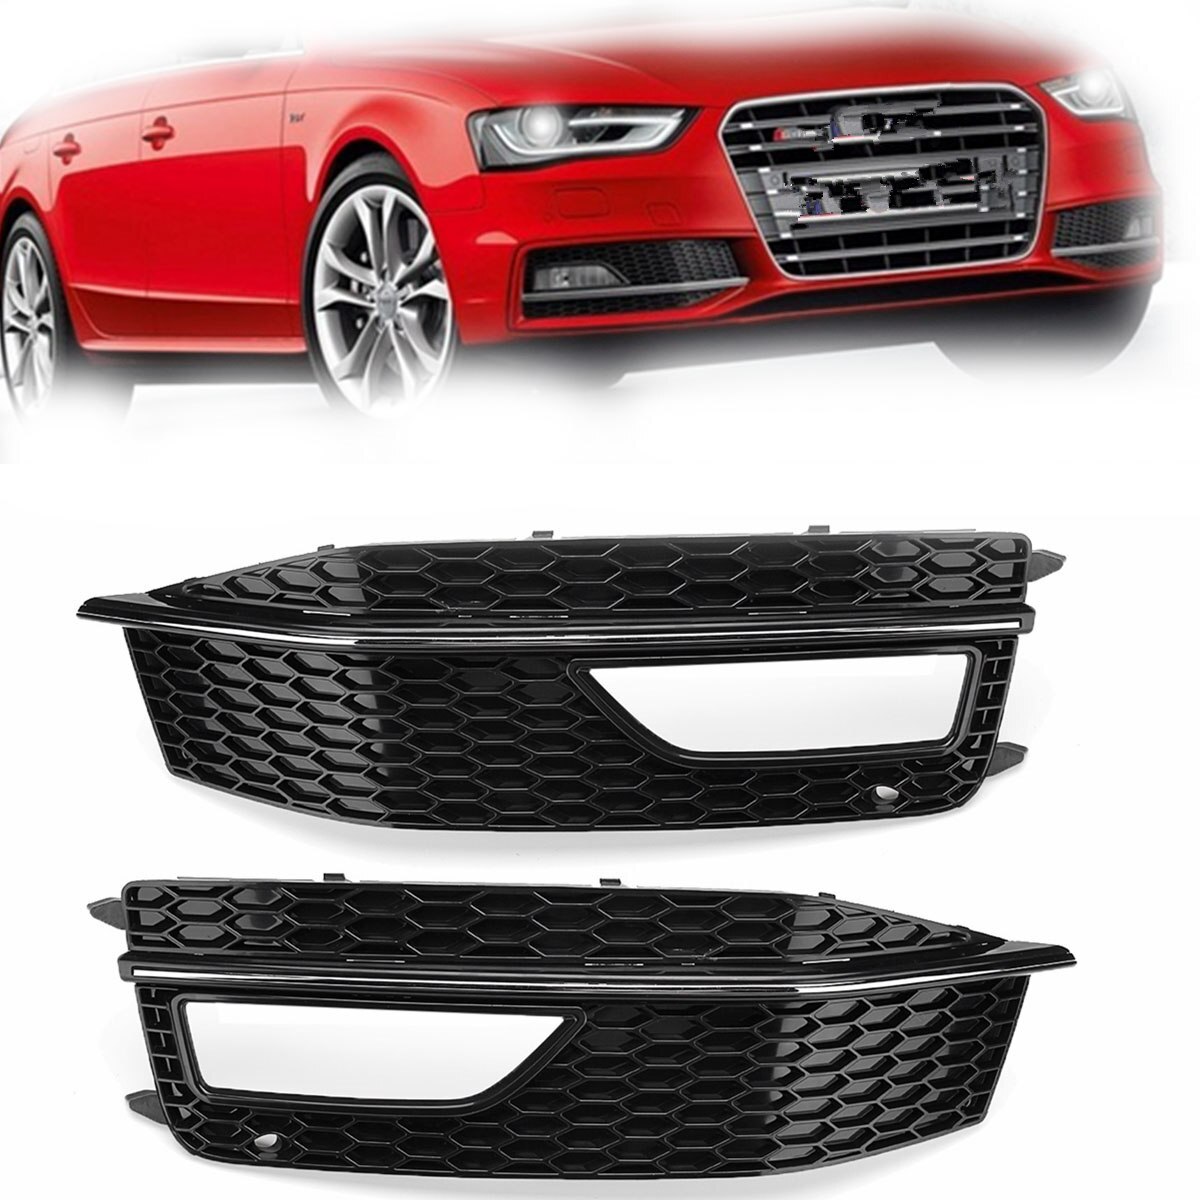 Audi A4 B8 S4 S-line 2012-2015 Fog Light Grill Grills Grille Cover Best ...